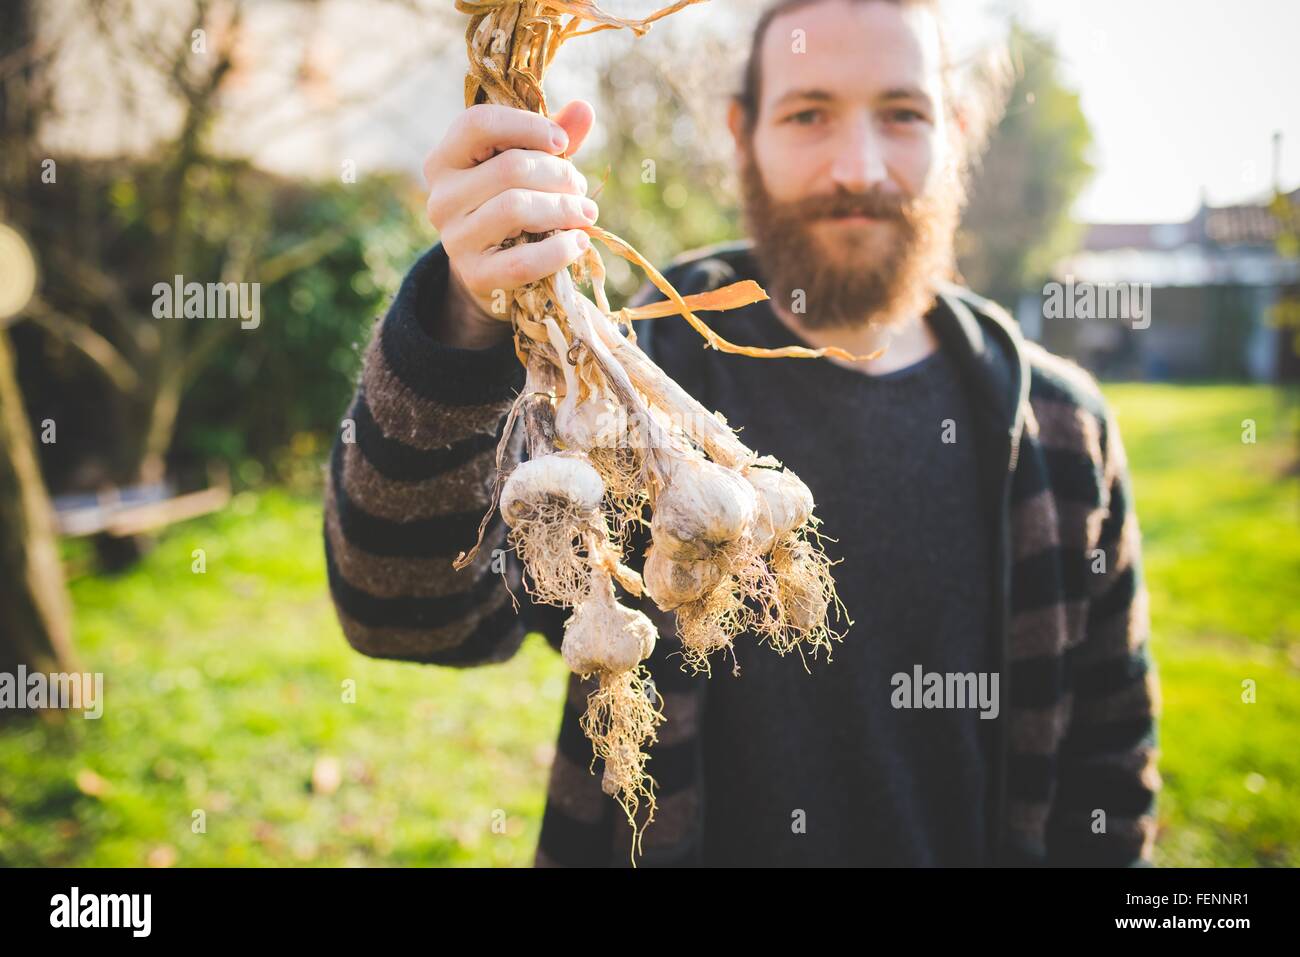 Bearded mid adult man in garden holding freshly picked garlic bulbs looking at camera smiling Stock Photo